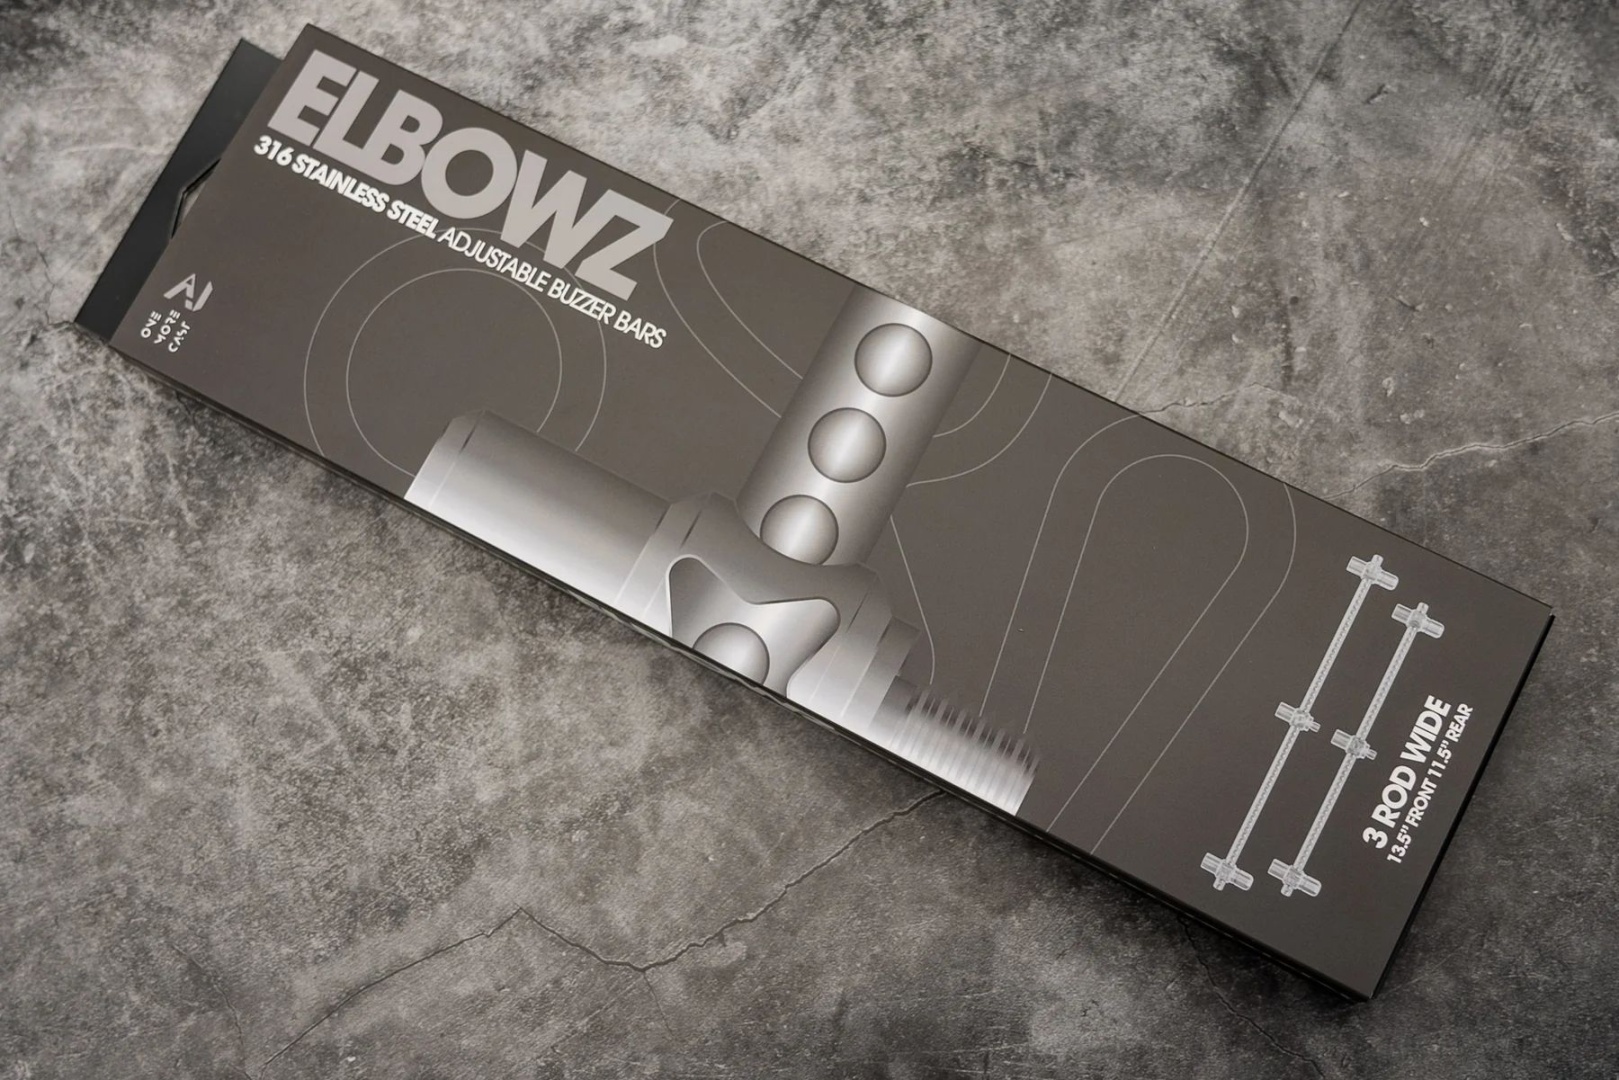 One More Cast Elbowz High-Grade 316 Stainless Steel 3 Rod Buzzbars